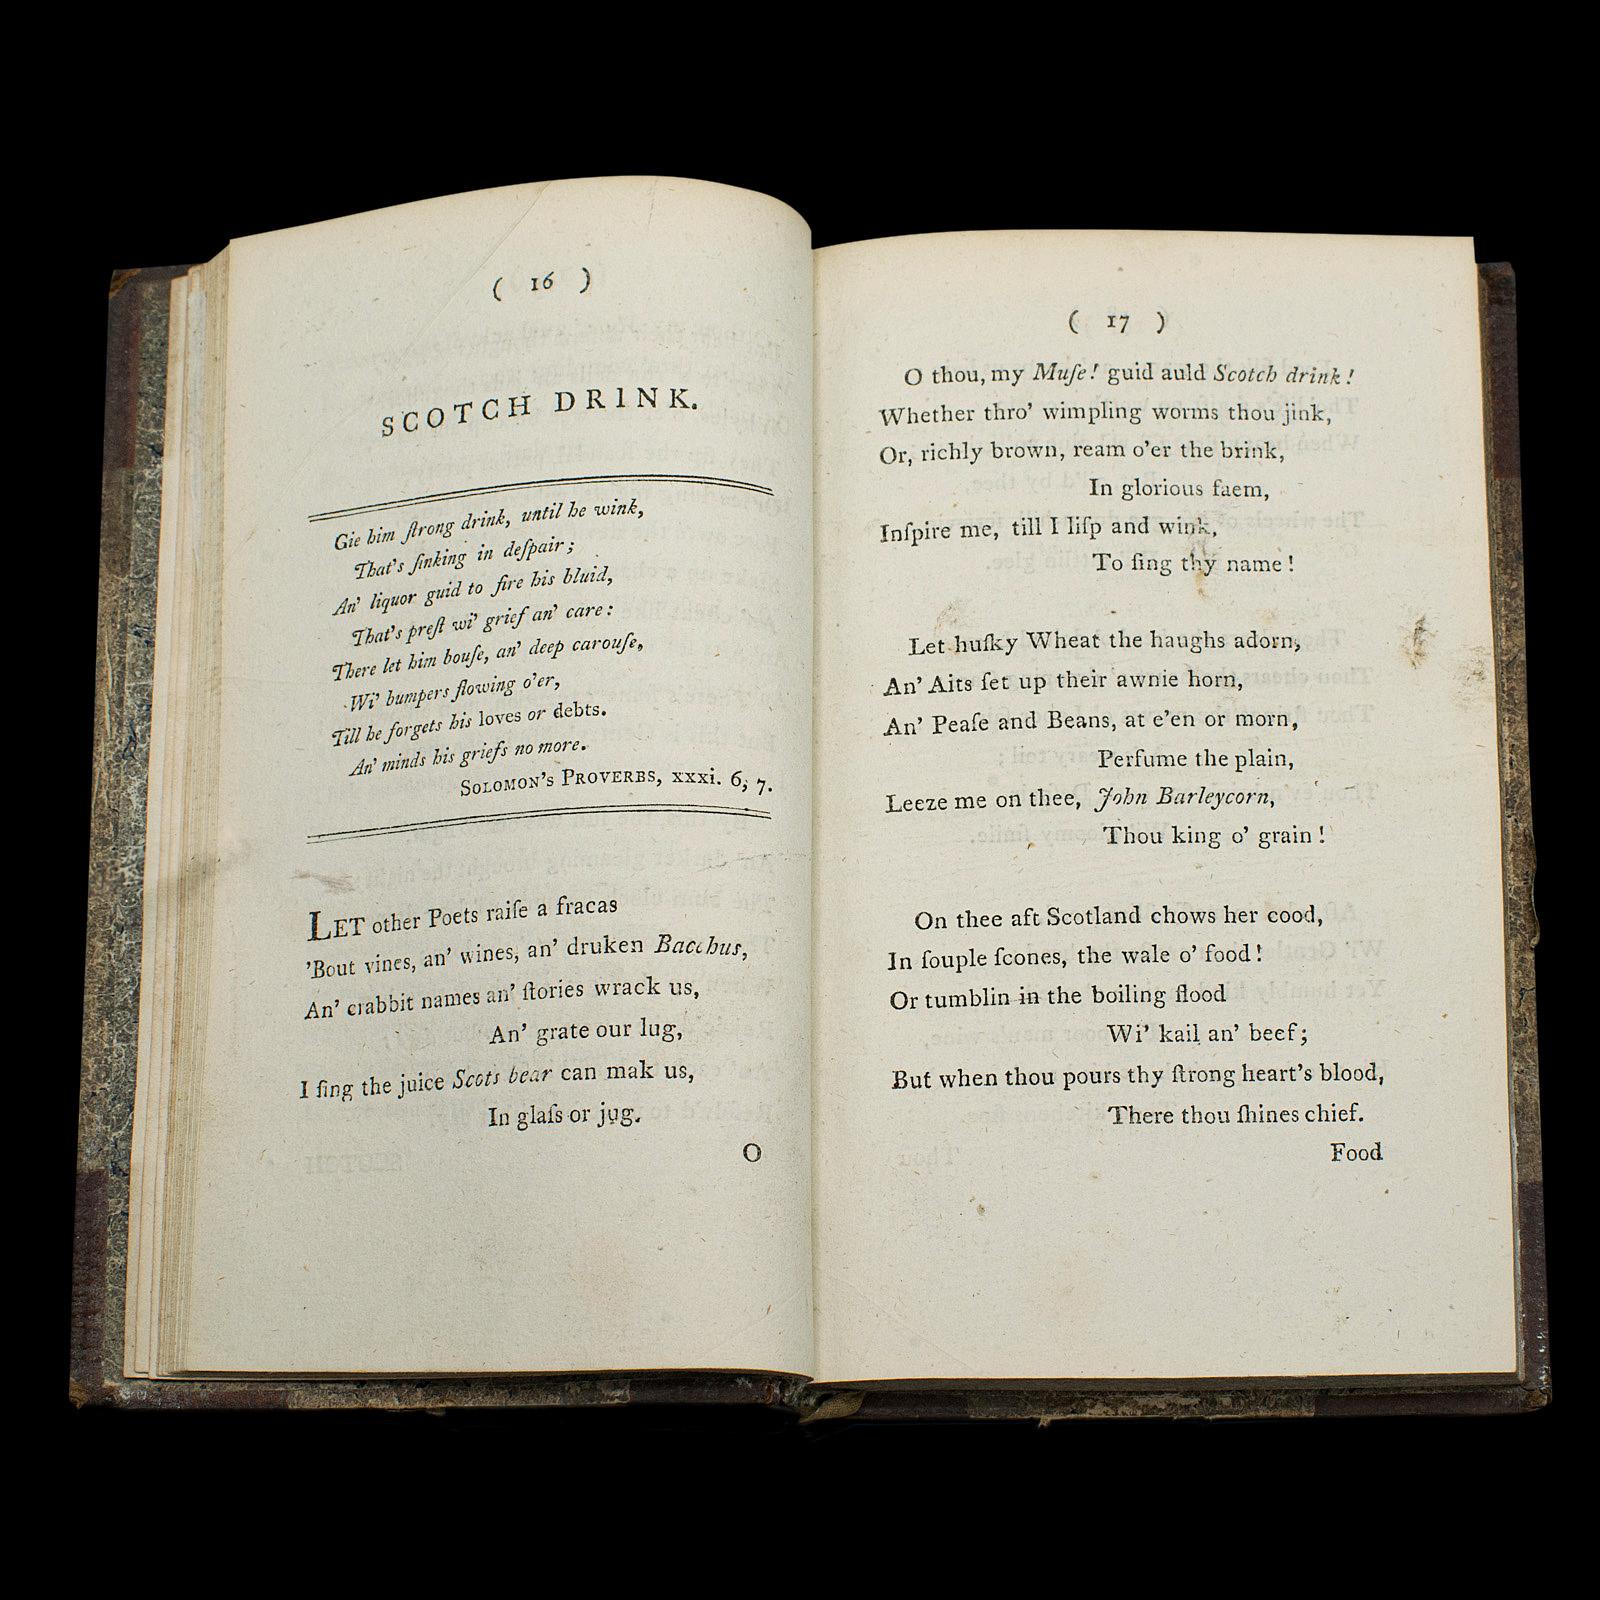 Book of Antique Poems by Robert Burns, Scottish Dialect English, Georgian, 1813 2